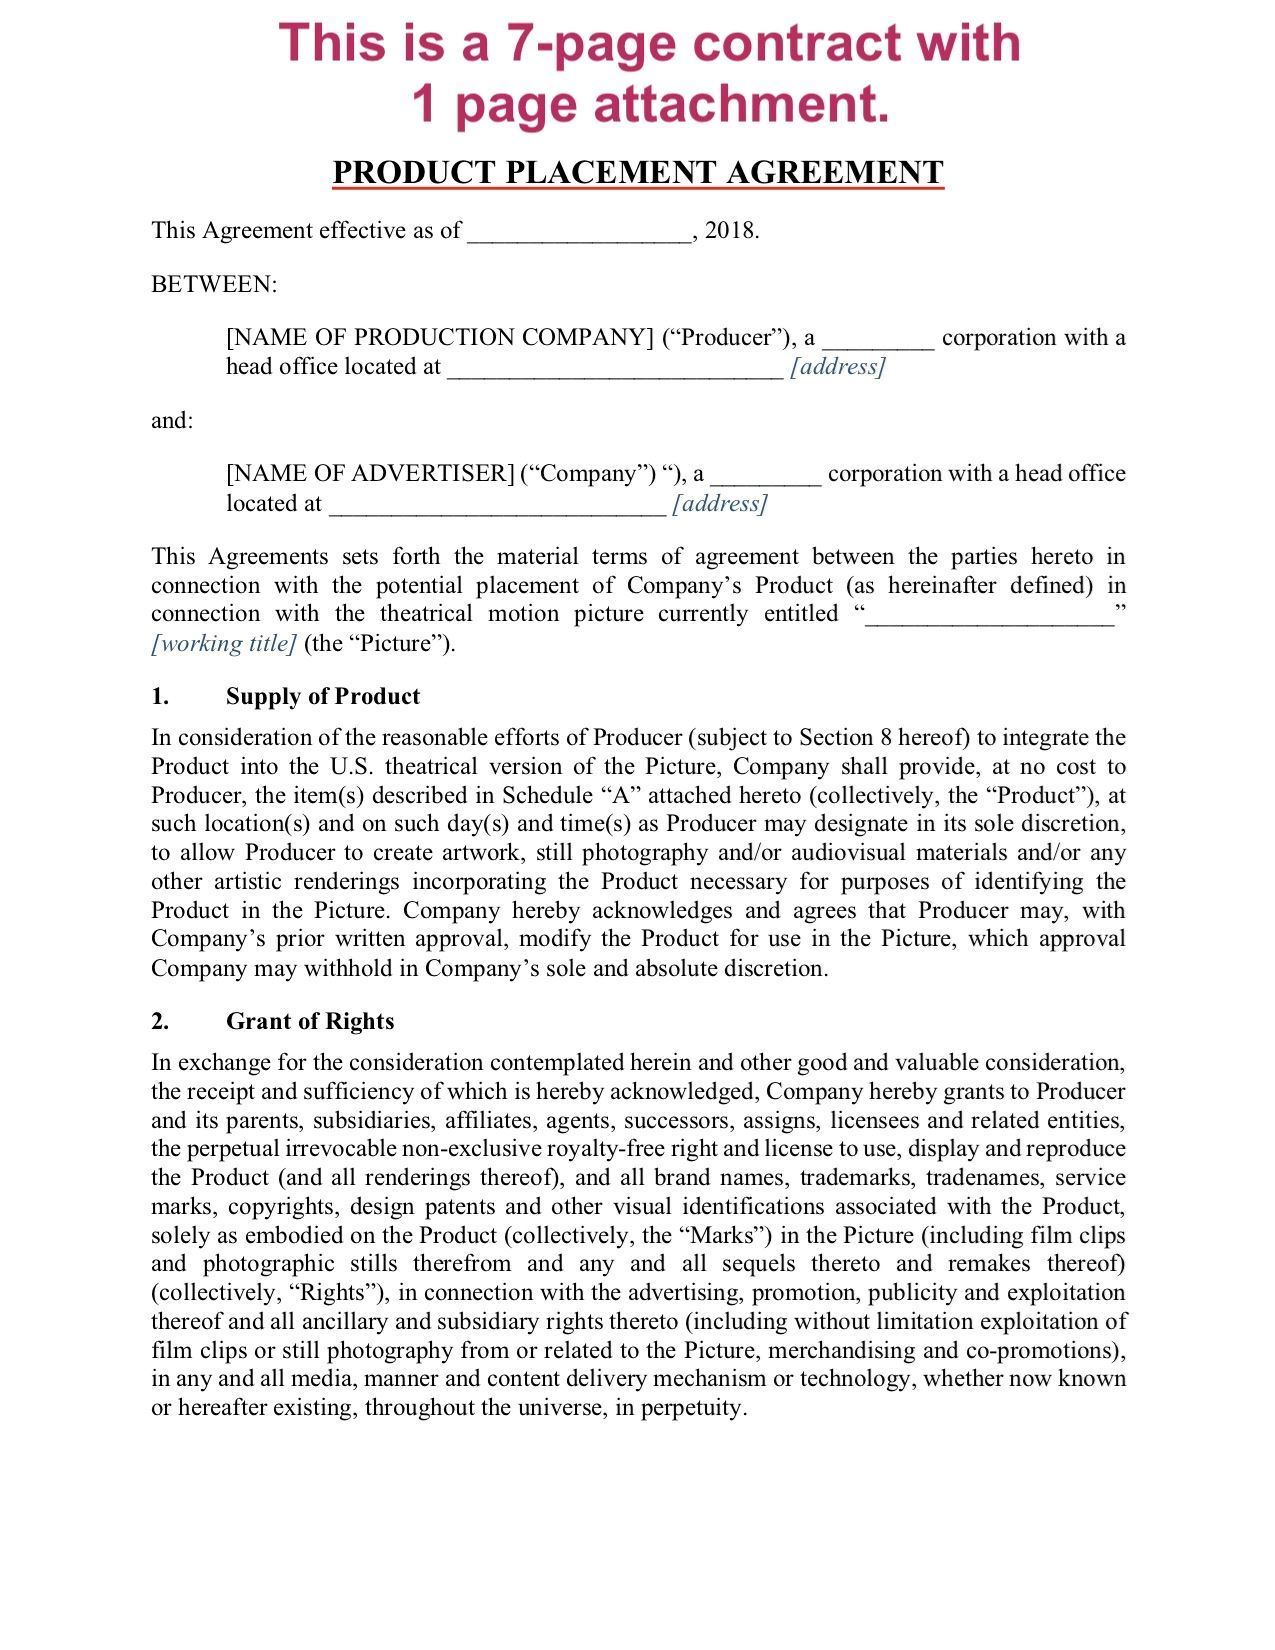 Sample Agreement For Takeover Of Business Product Placement Agreement For Film